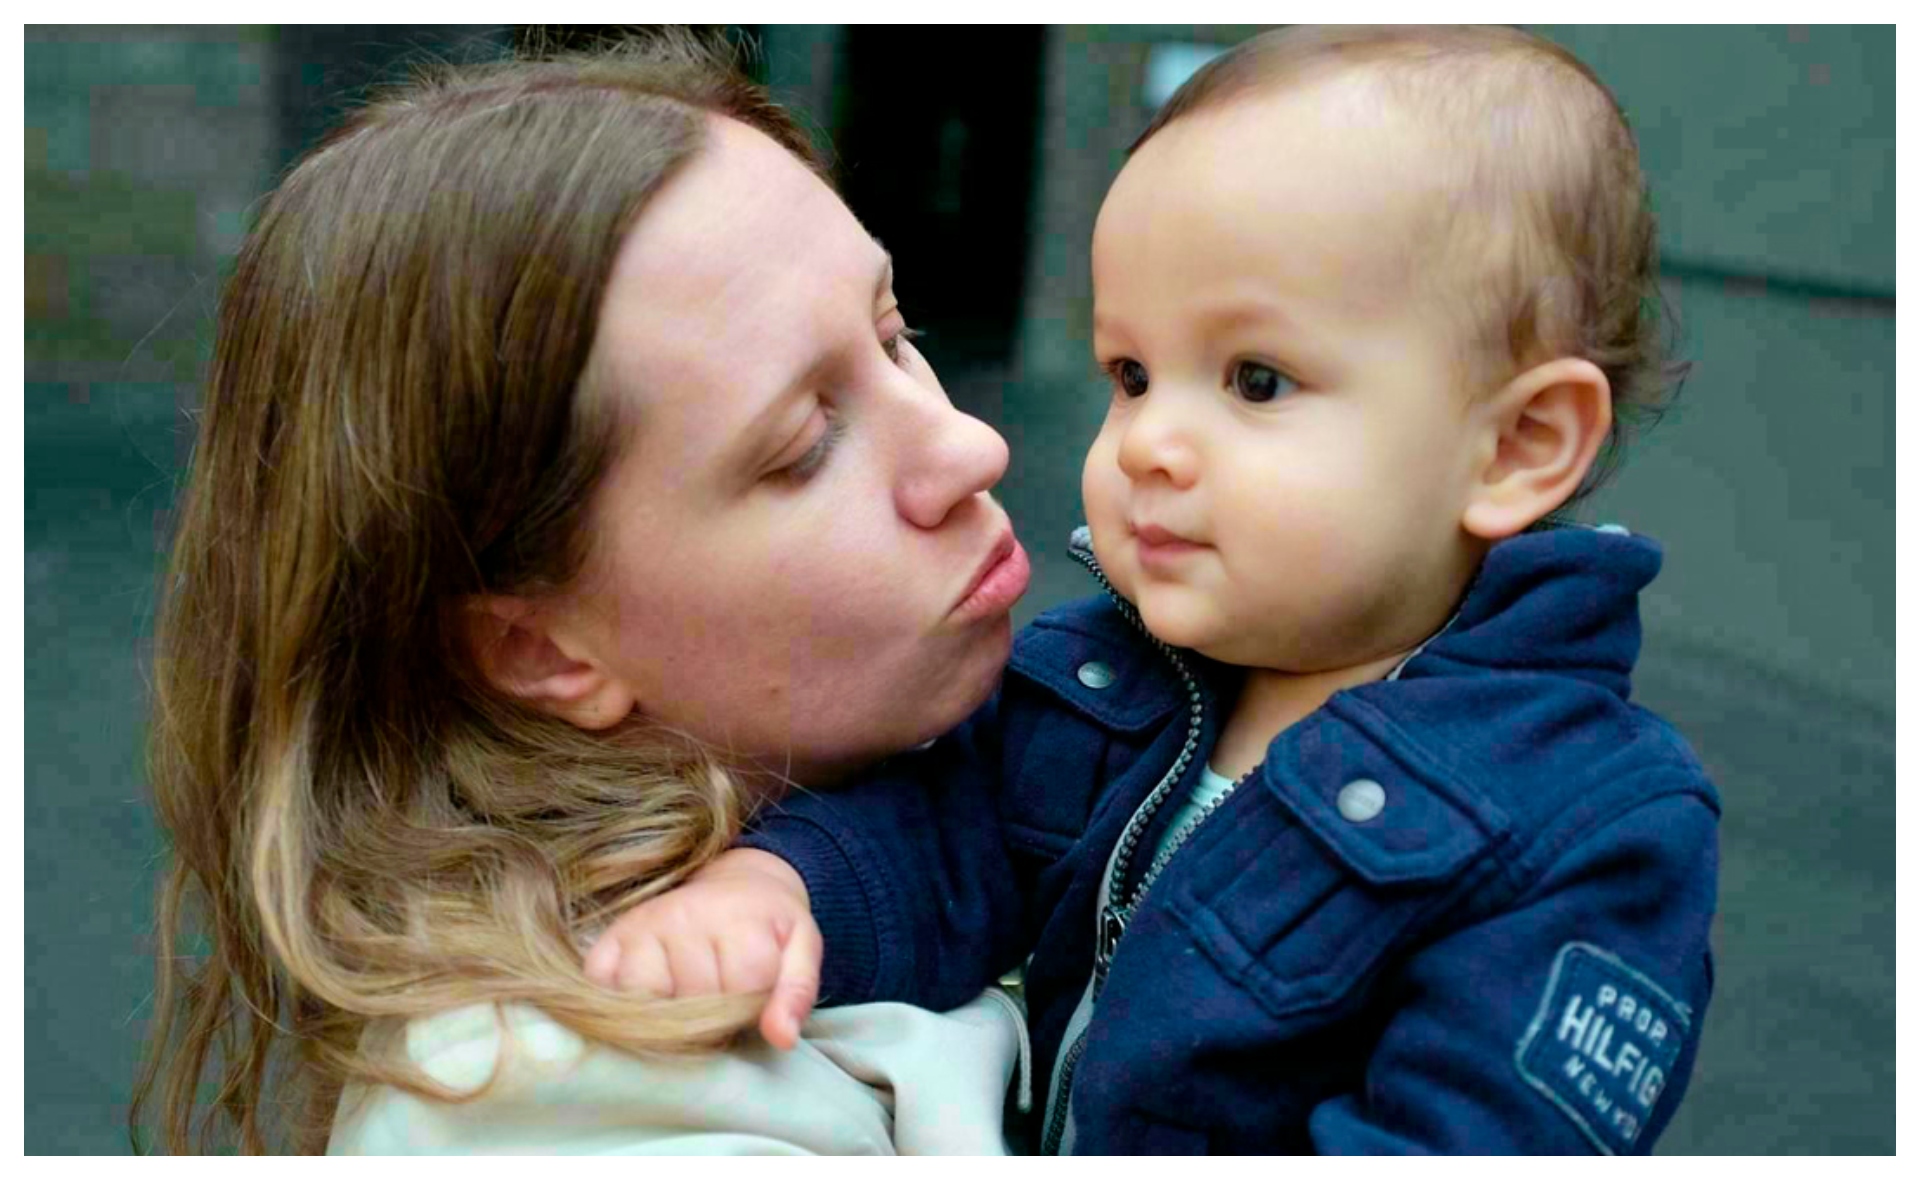 Sarah Copland lost her two-year-old son in the Beirut Blast, now she’s telling her story